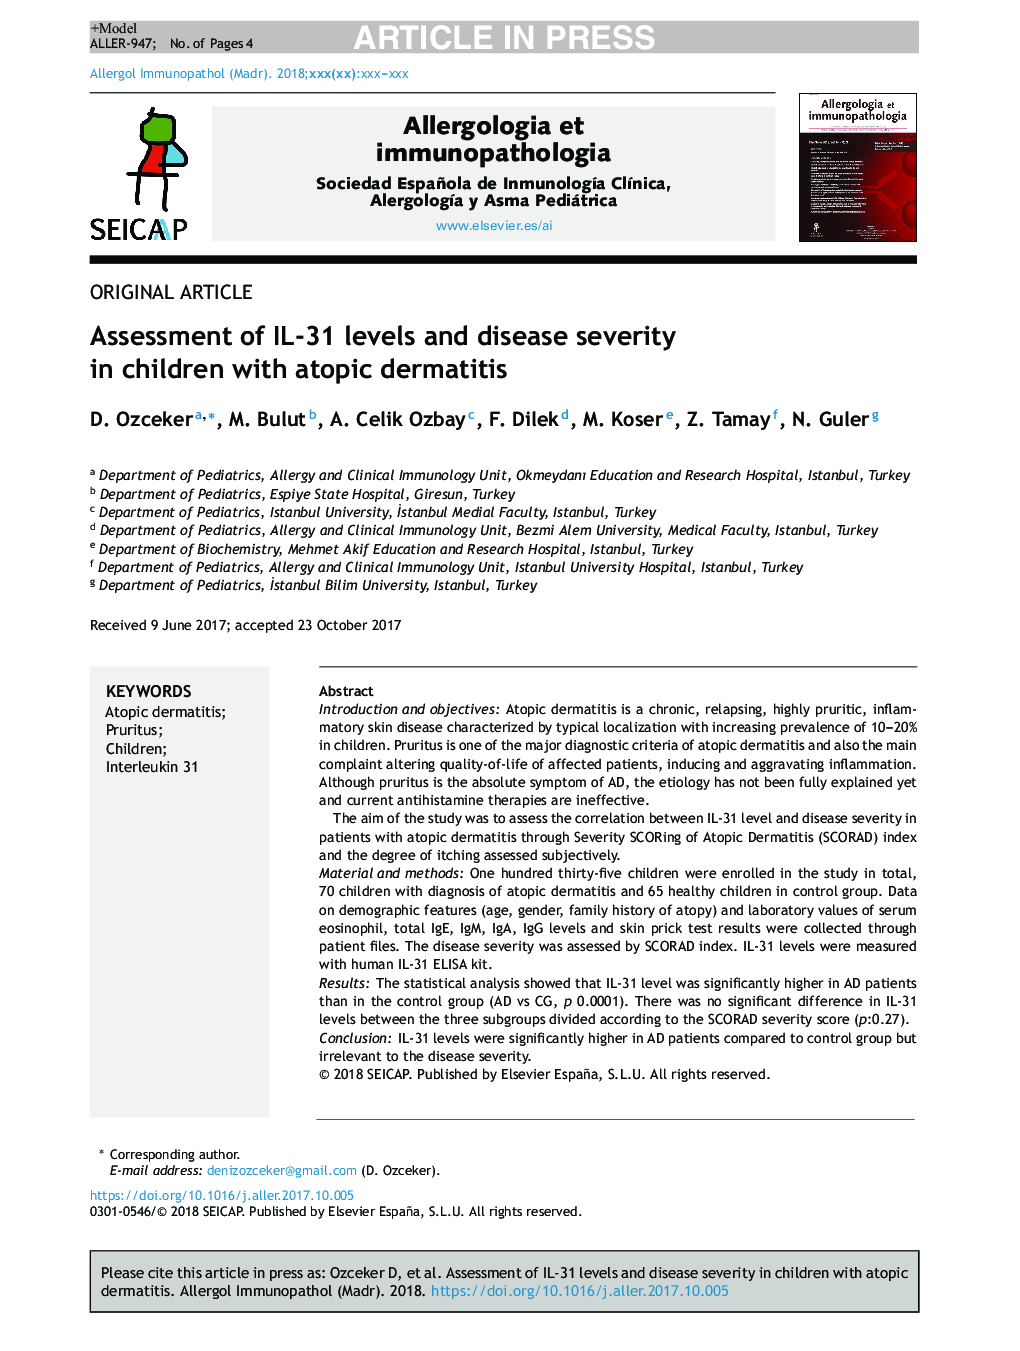 Assessment of IL-31 levels and disease severity in children with atopic dermatitis